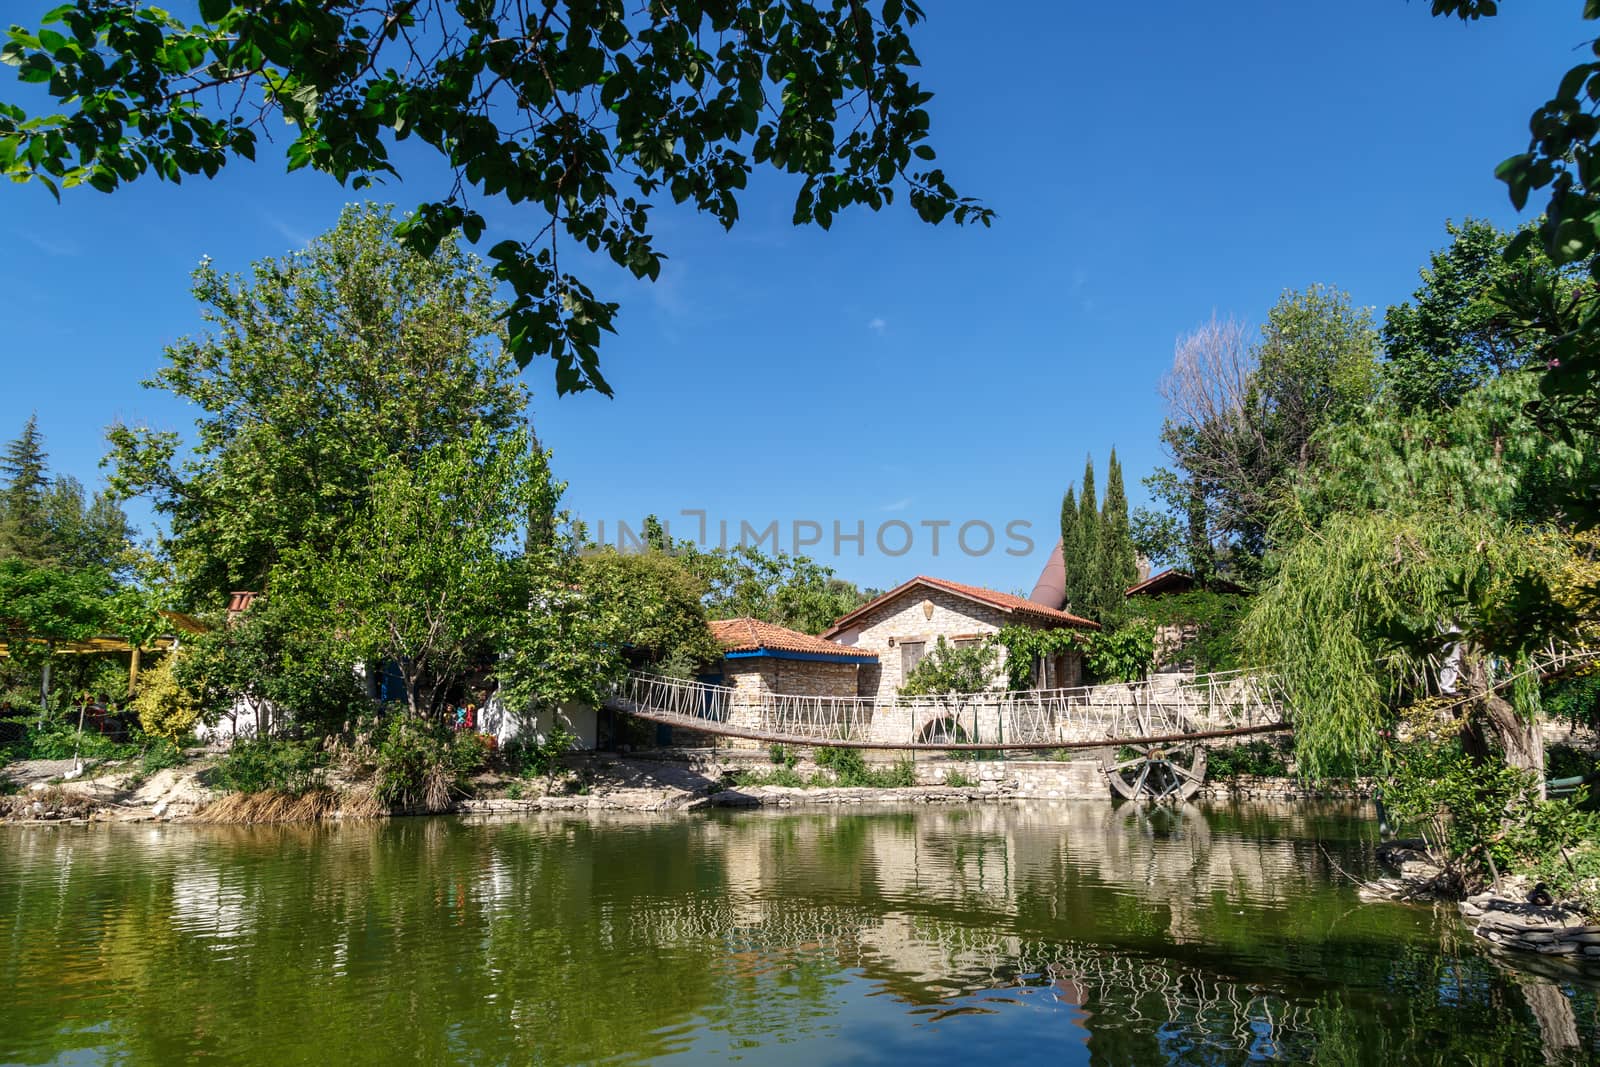 Landscape view of natural park with lake, trees and wooden arbour on bright blue sky background.